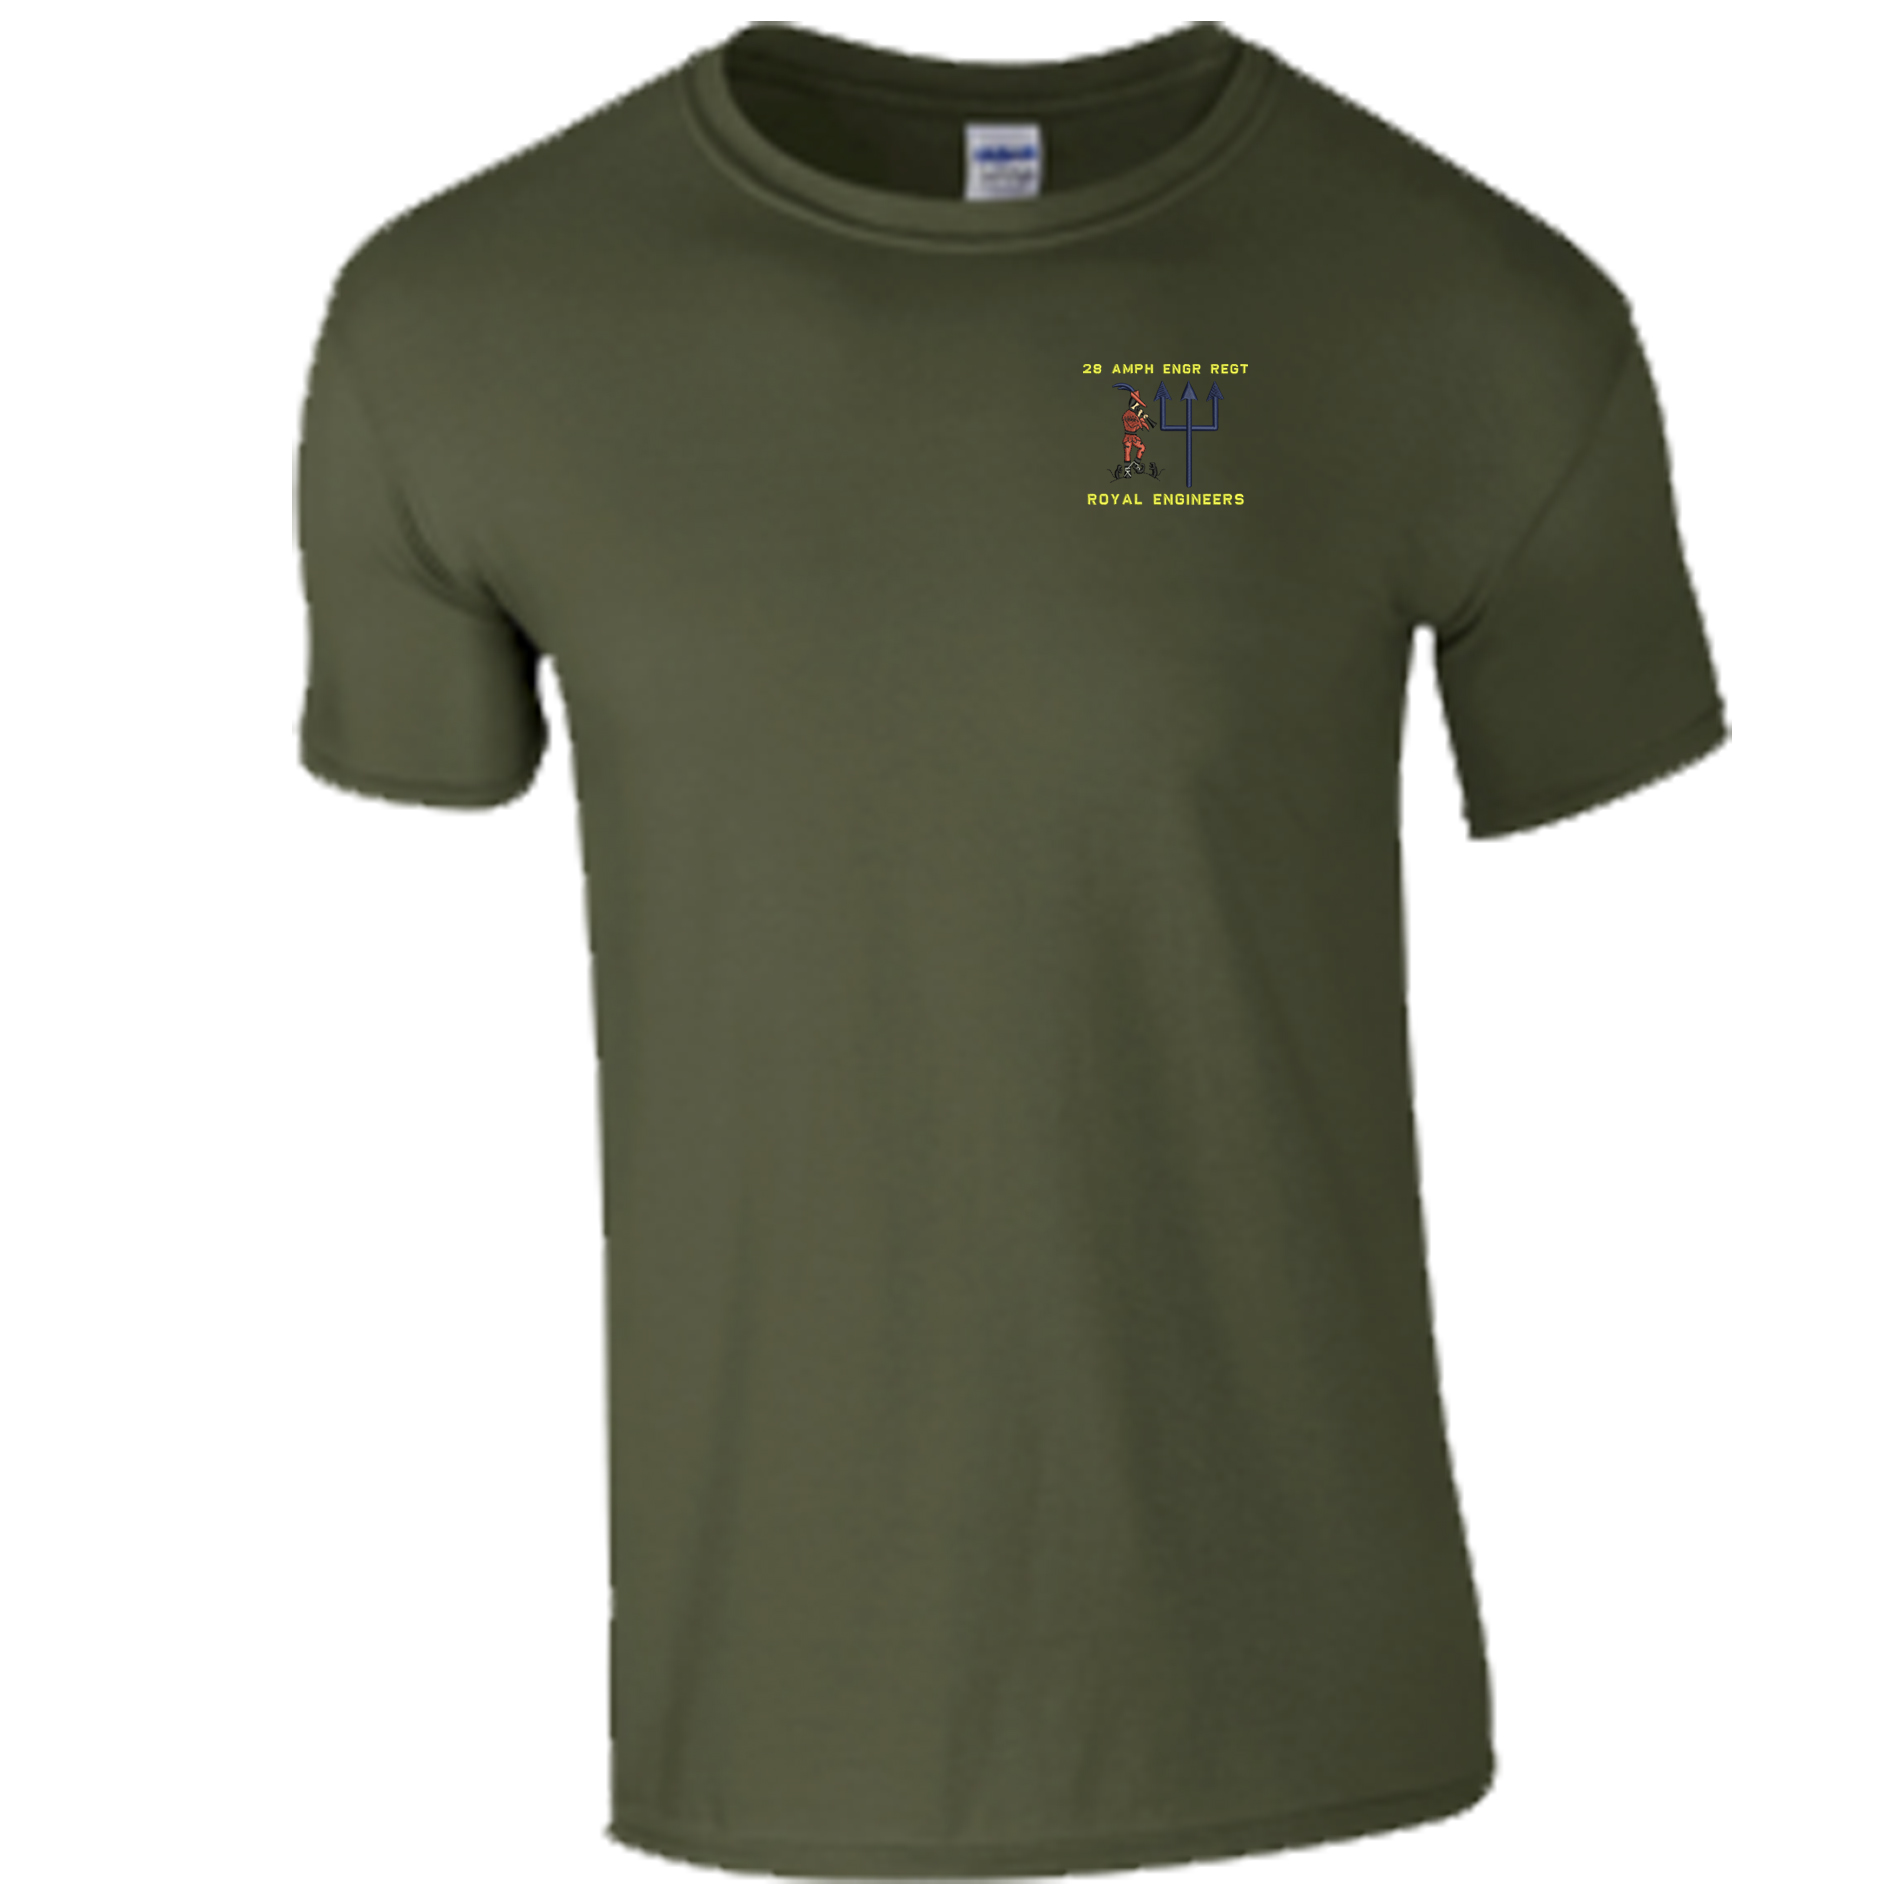 28 Amph Engr Regt Embroidered T-shirt